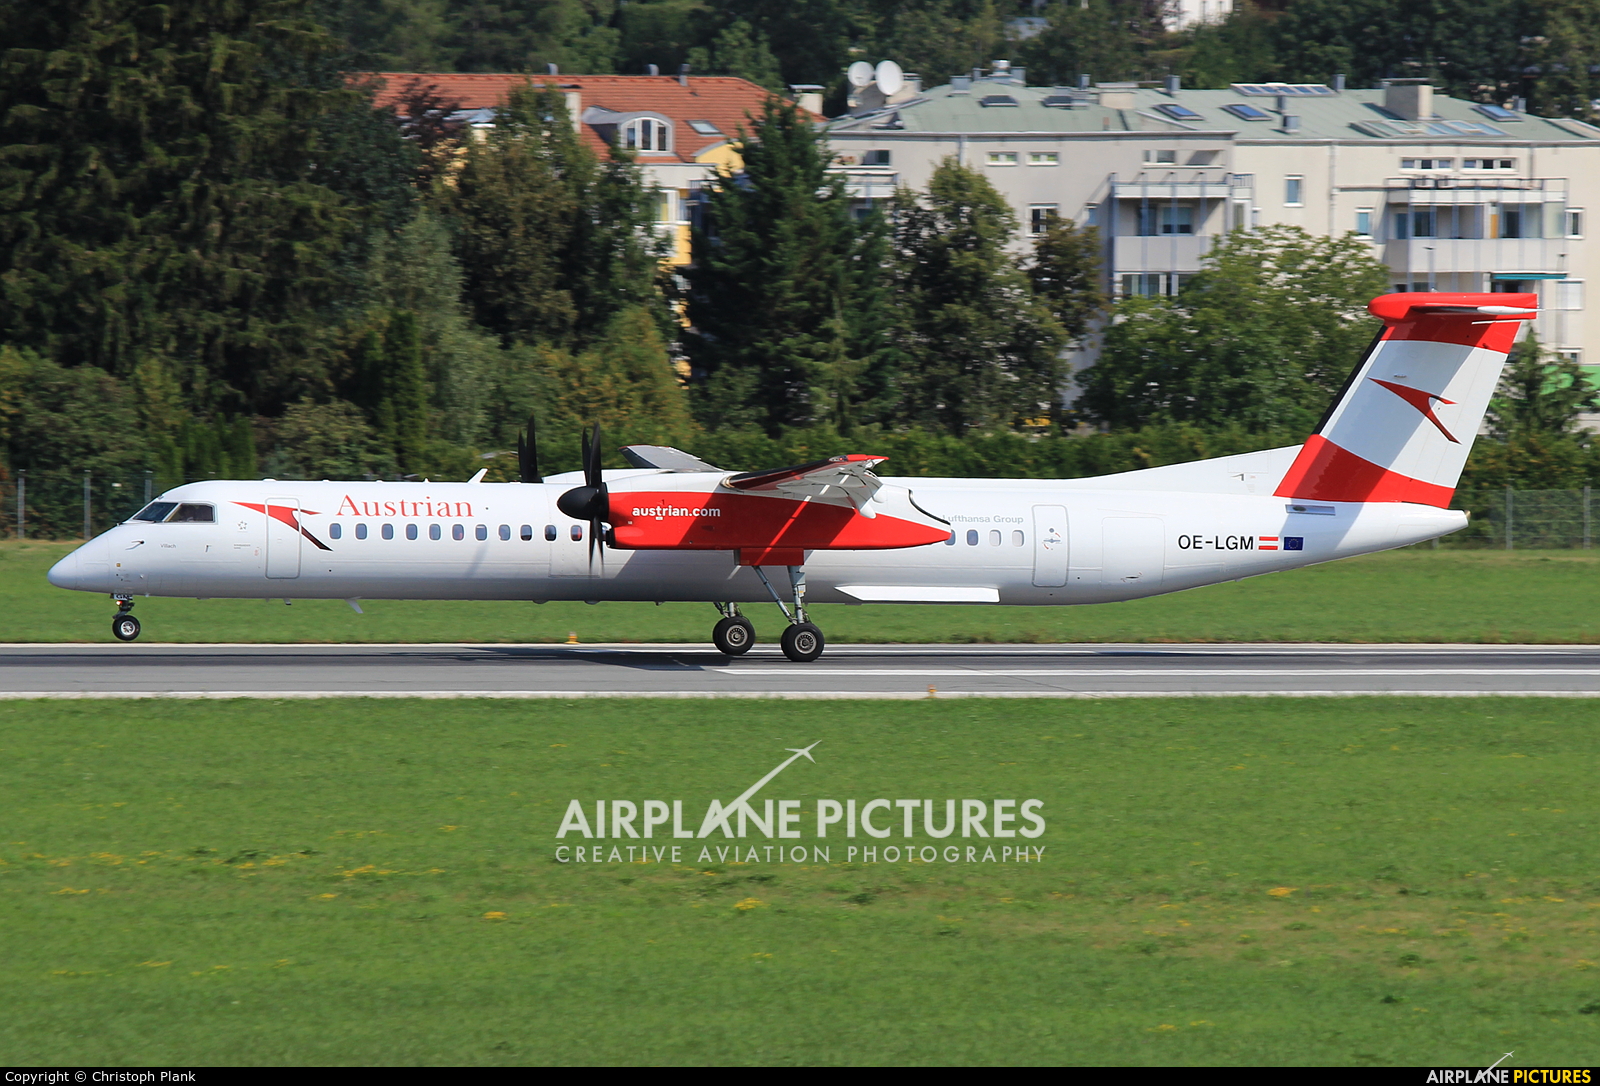 Austrian Airlines/Arrows/Tyrolean OE-LGM aircraft at Innsbruck